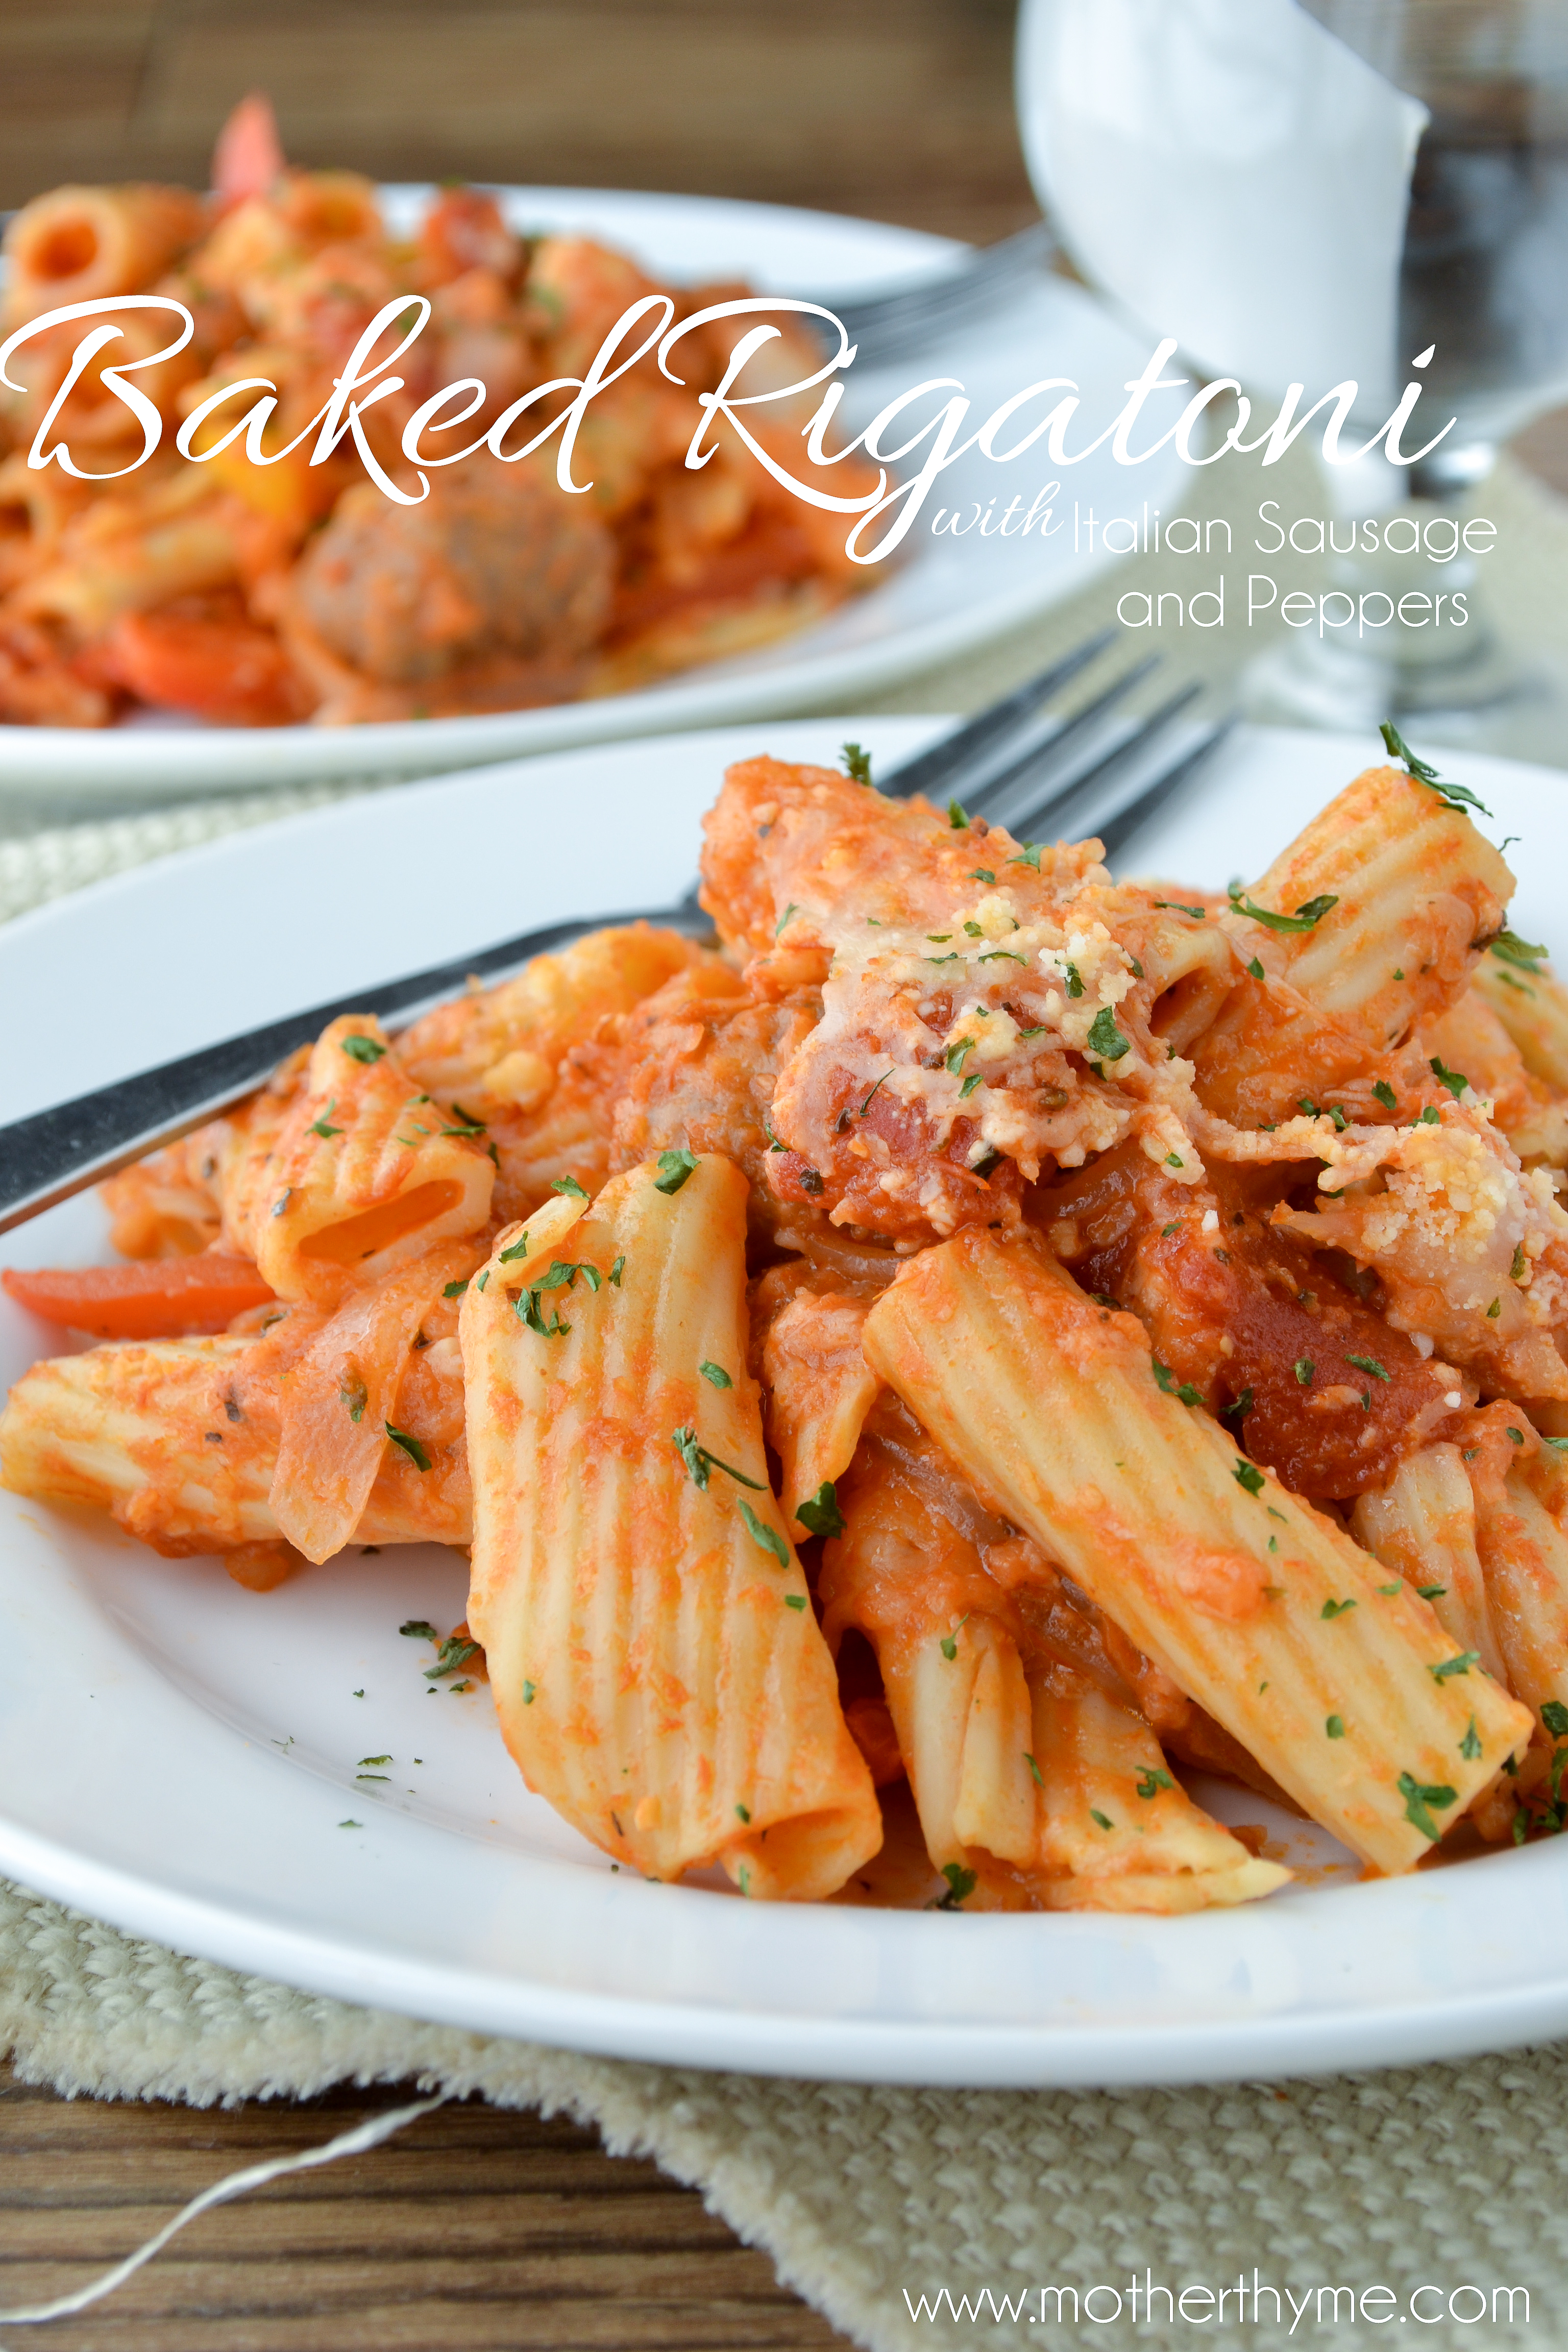 Baked Rigatoni with Italian Sausage and Peppers